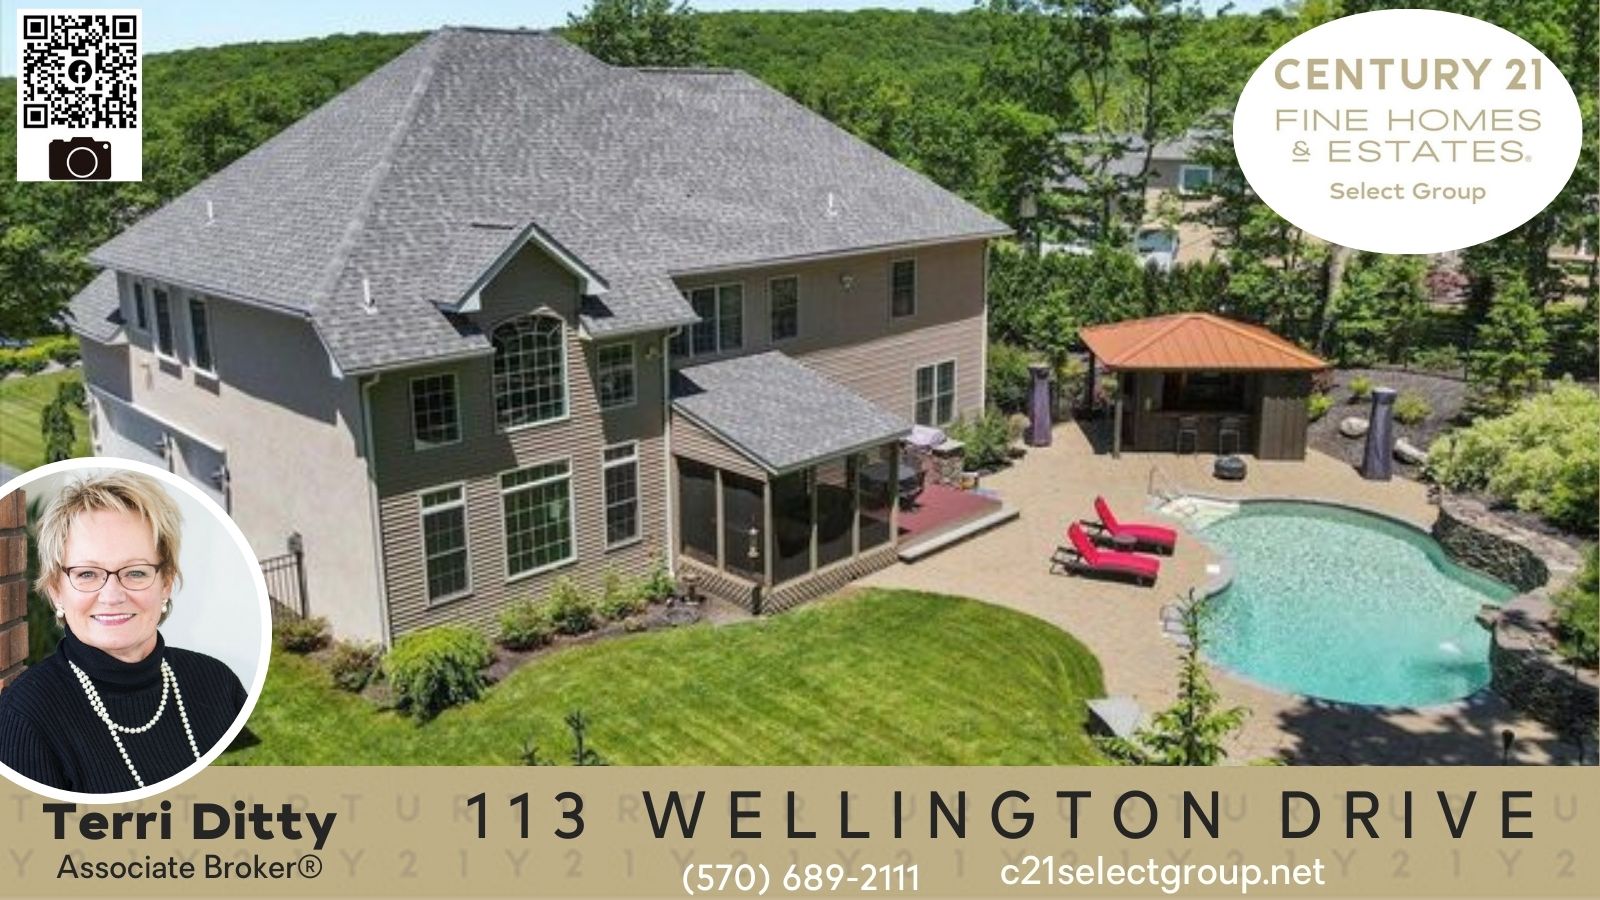 113 Wellington Drive: Stately 5 Bedroom Home in Windsor Hill